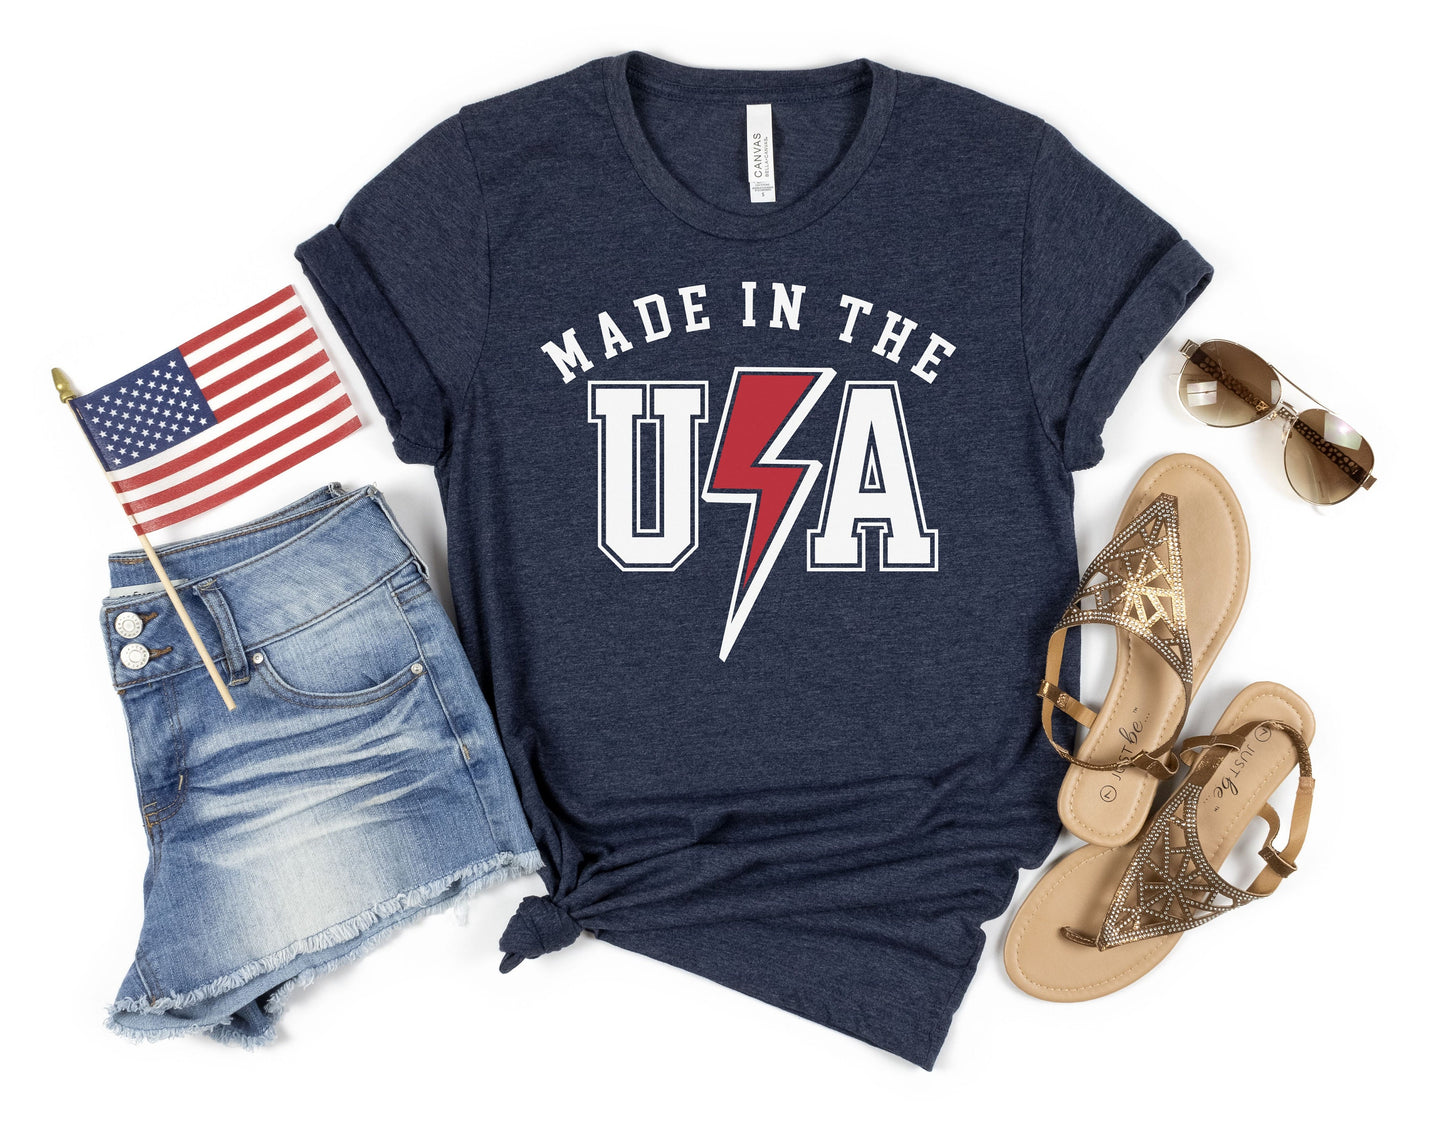 Made in the USA t-shirt • 4th of July Shirt